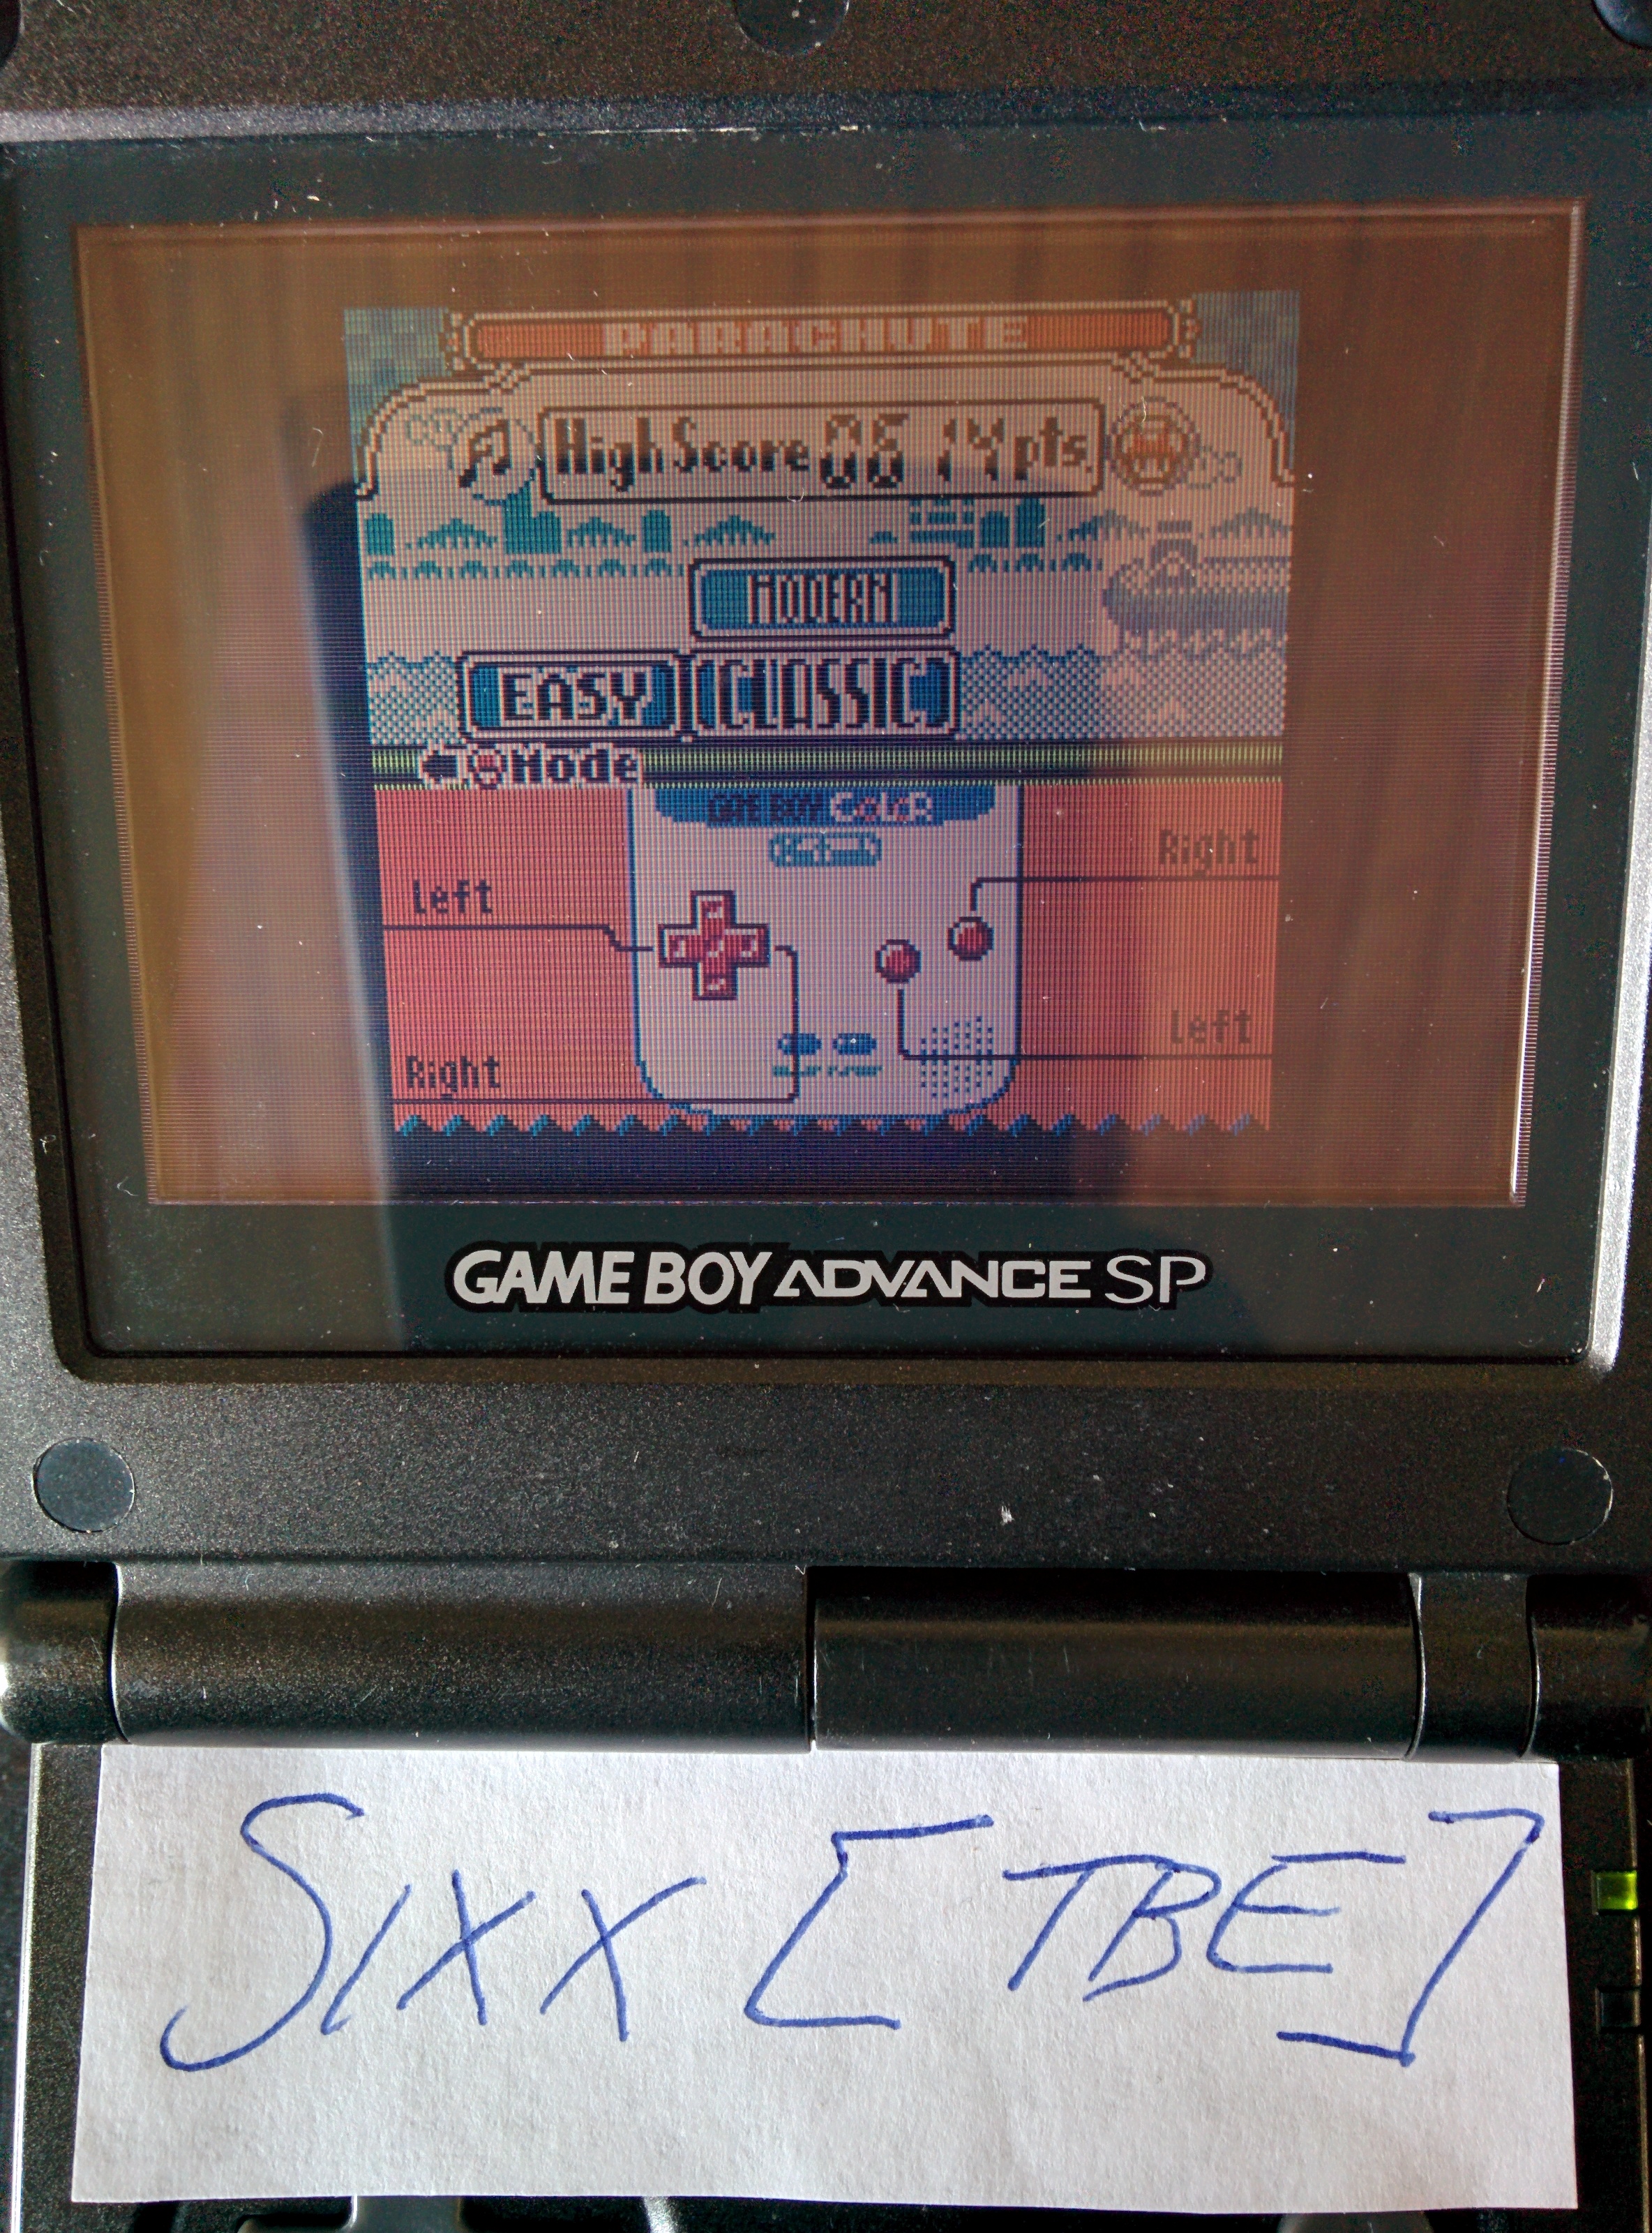 Sixx: Game & Watch Gallery 2: Parachute: Classic: Easy (Game Boy Color) 614 points on 2014-08-10 06:24:26